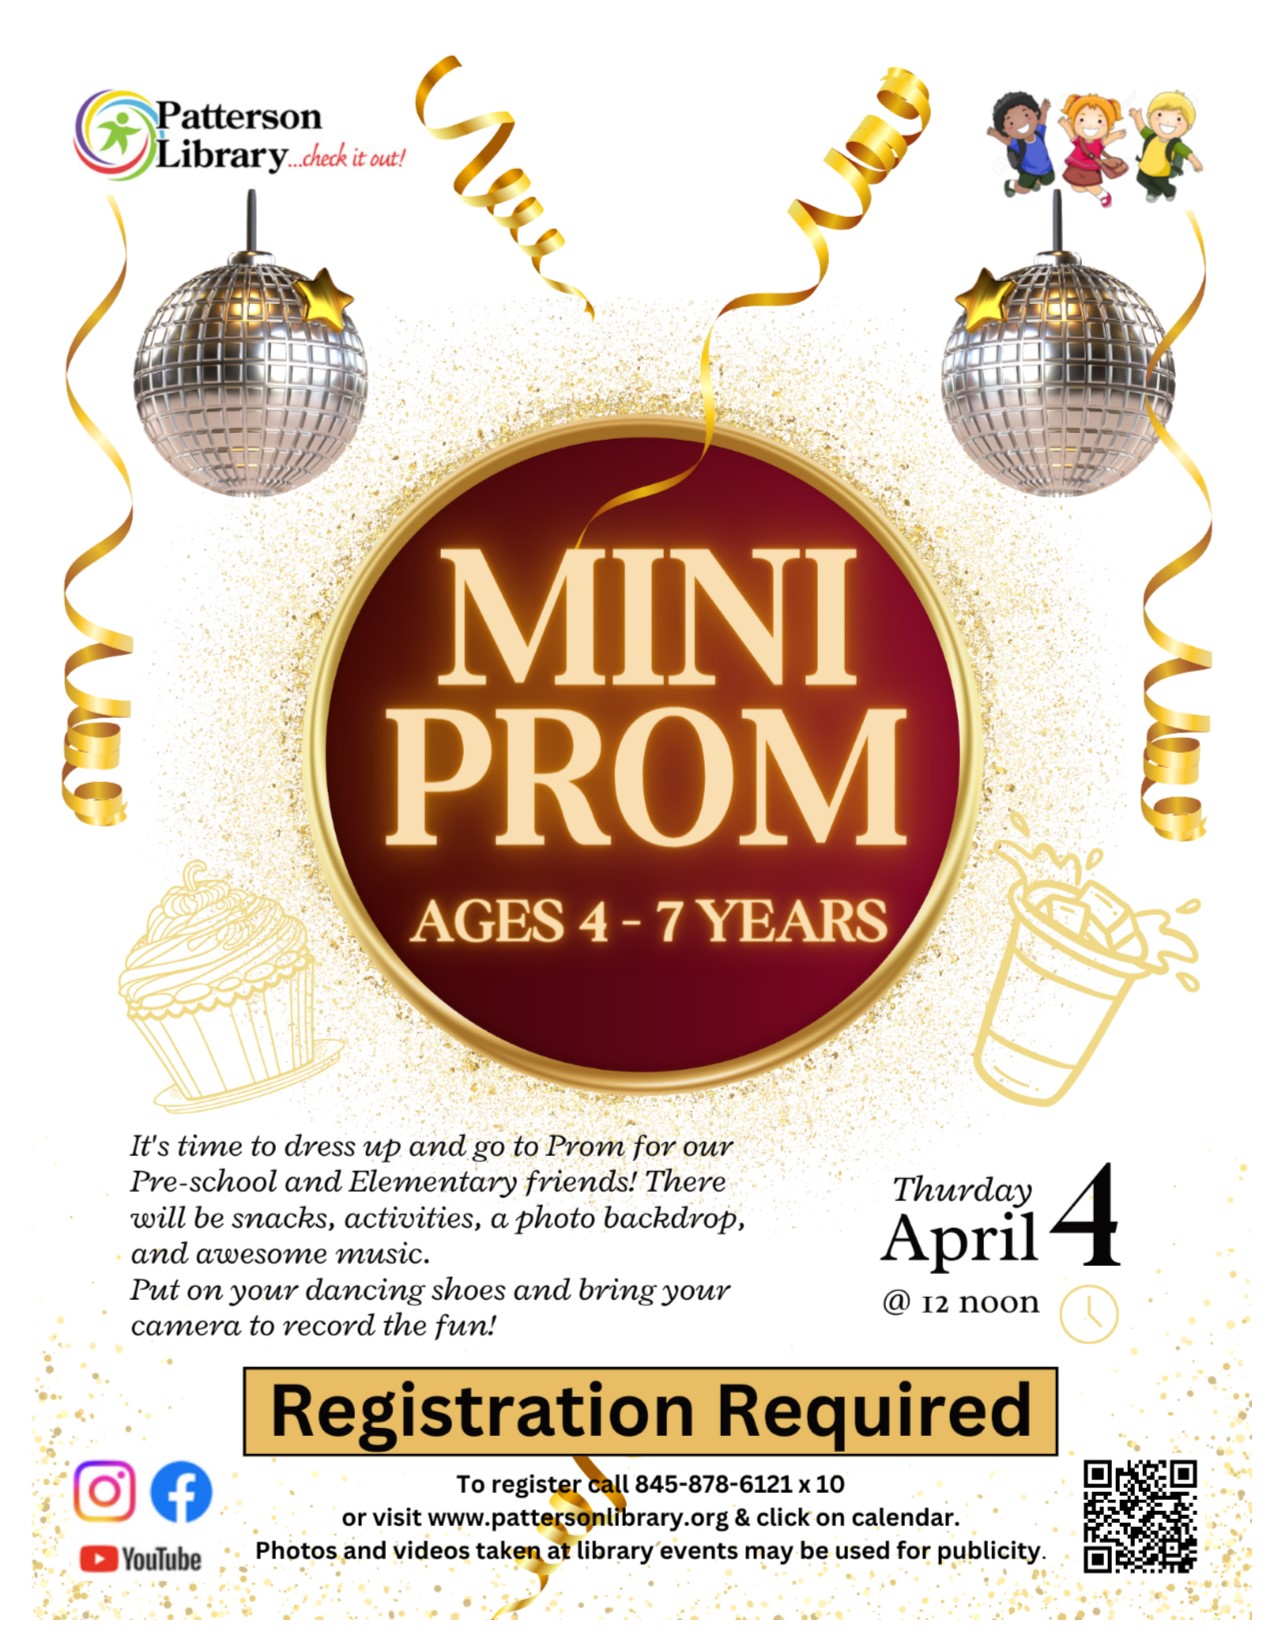 Mini Prom for ages 4-7